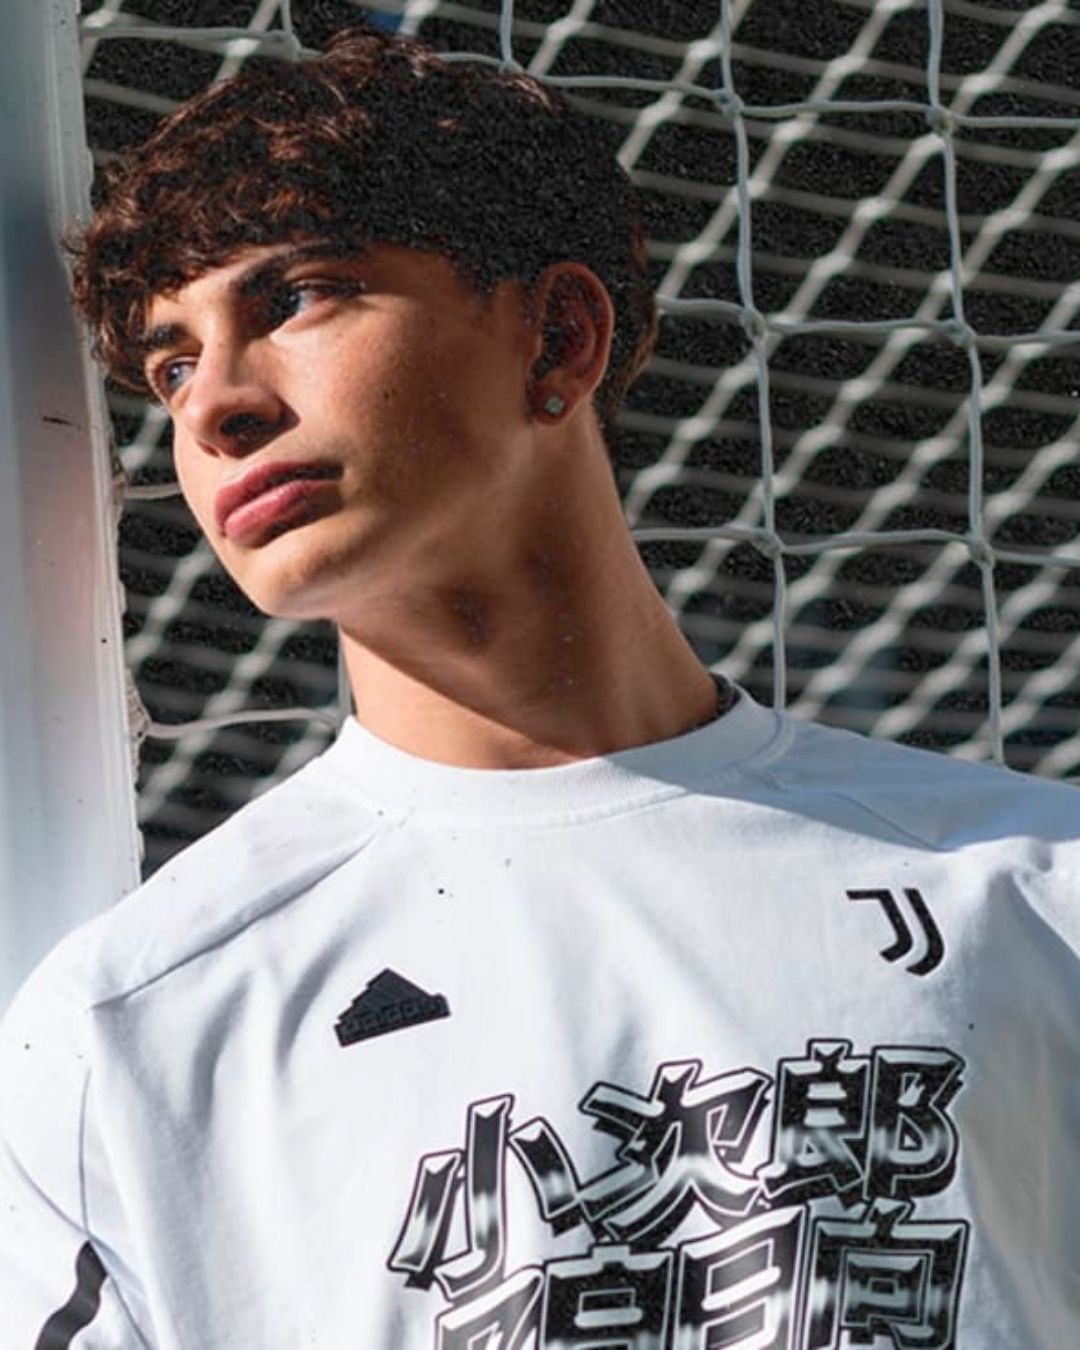 Juventus releases a jersey dedicated to Captain Tsubasa To win over the anime audience